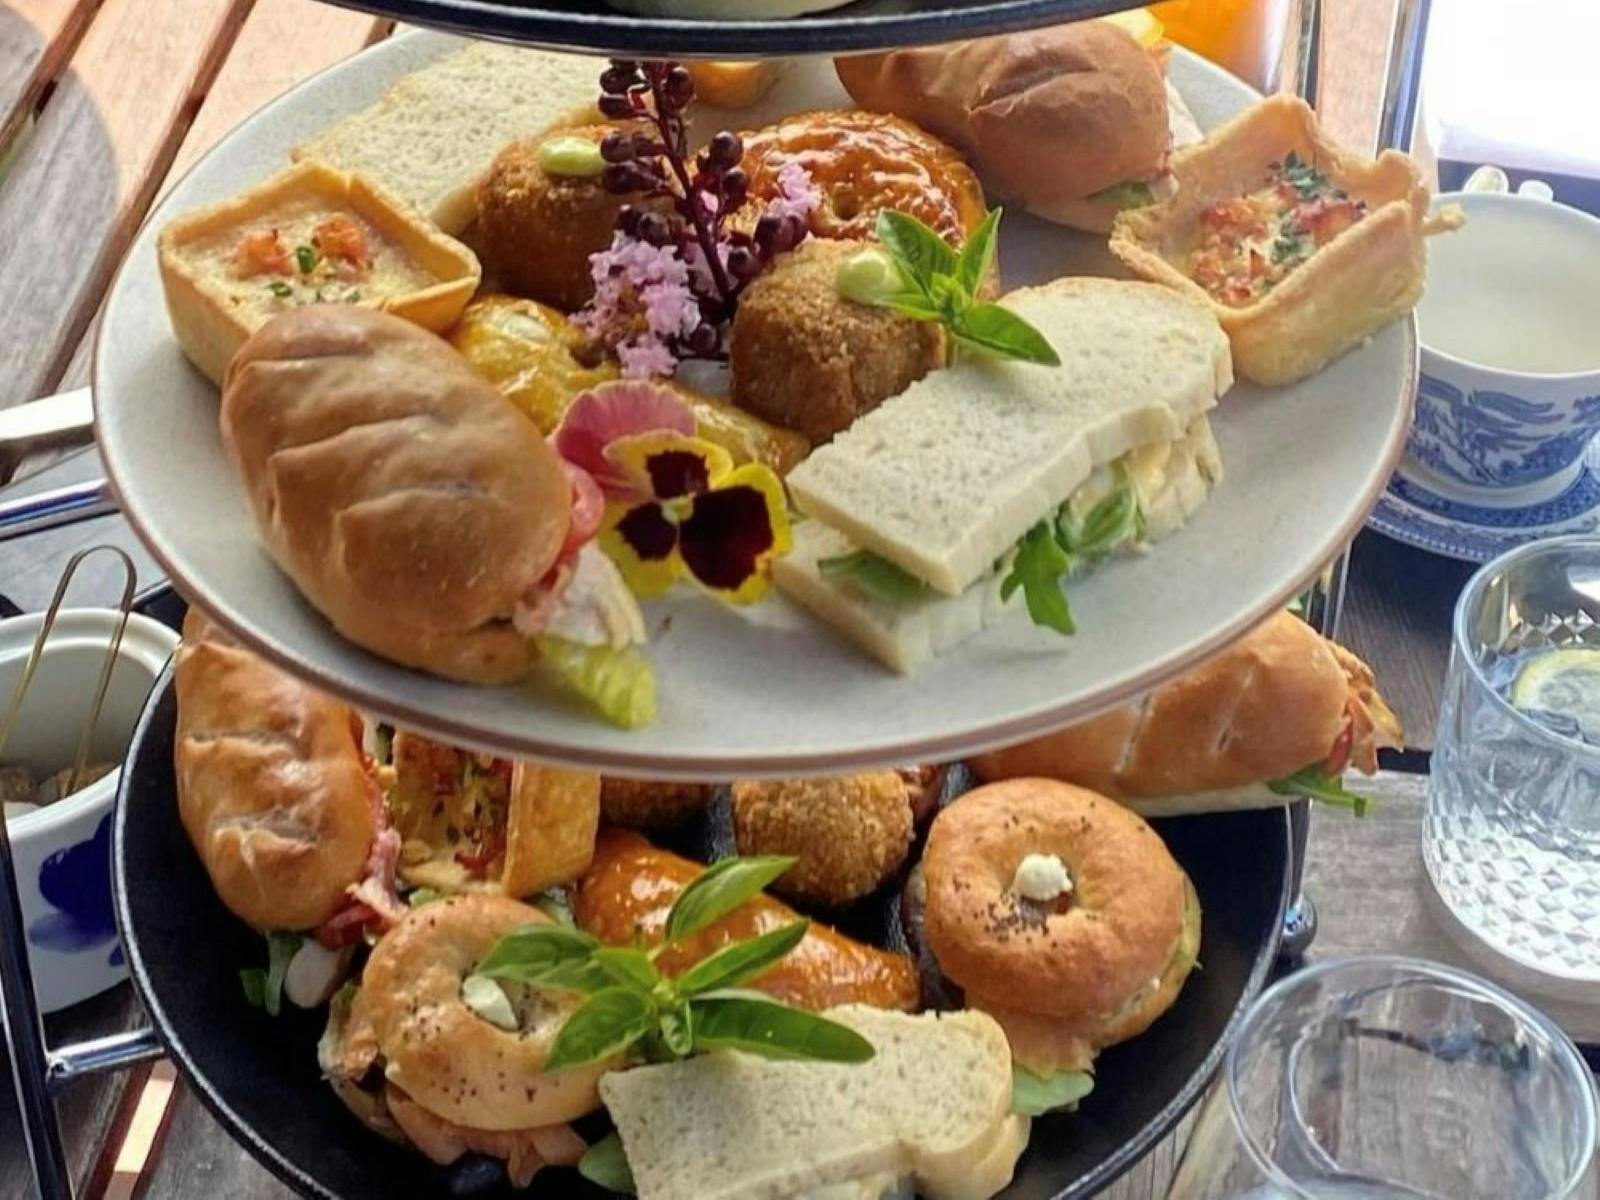 2 tiers of savoury high tea items incluidng bagels, ribbon sandwiches and quiches